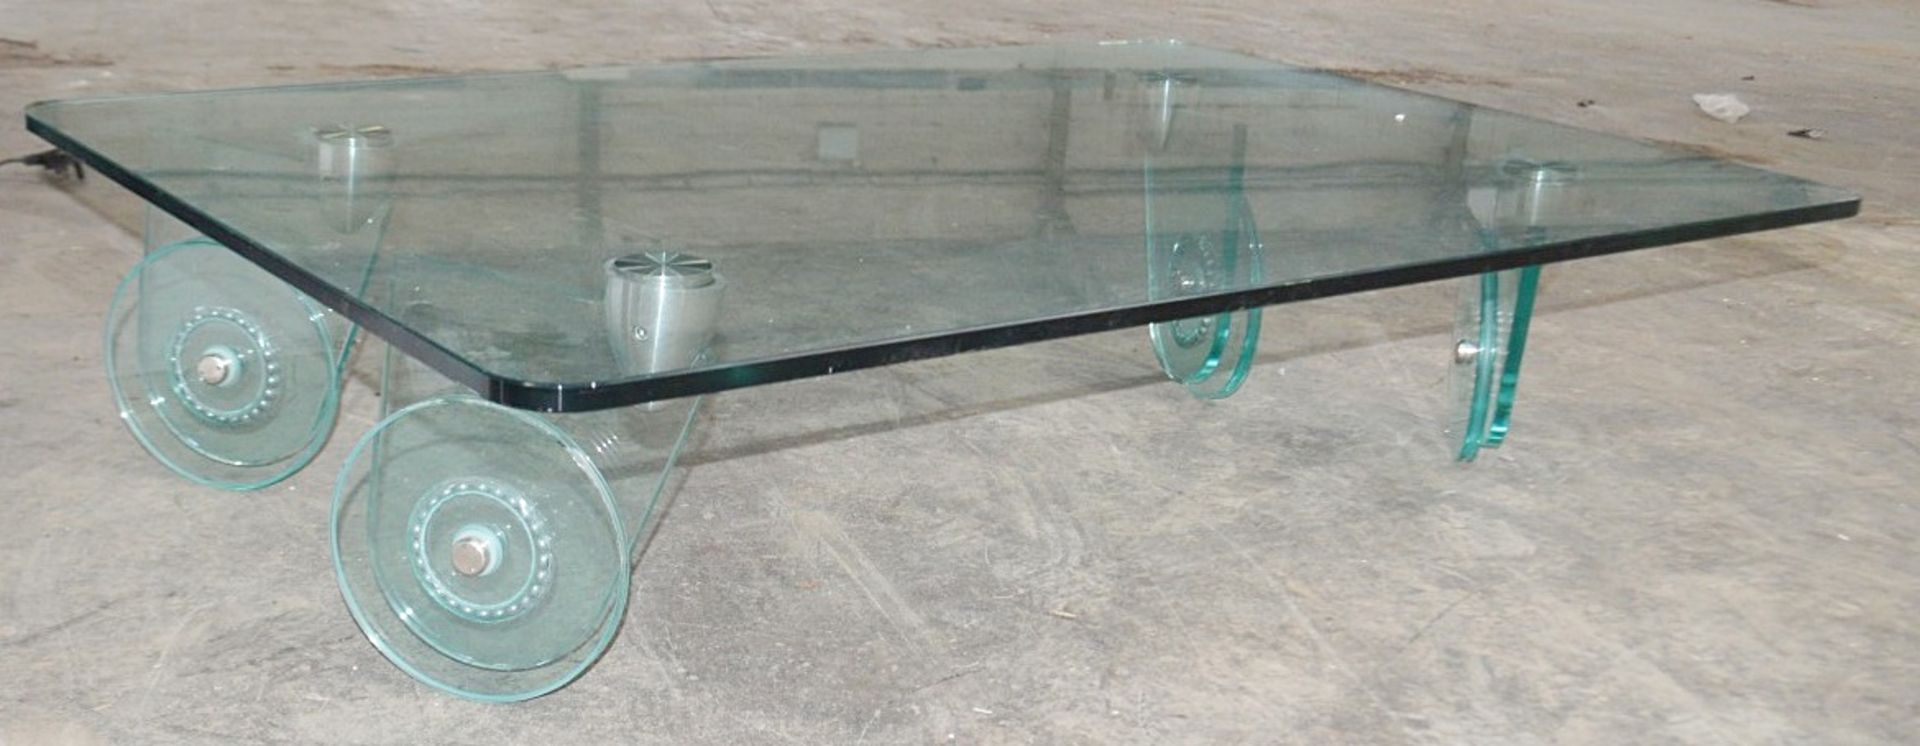 1 x Display Trolley Made Of Toughened Glass - Dimensions: W125 x D85 x H29cm - Ref: MHB165 - CL670 - - Image 2 of 4